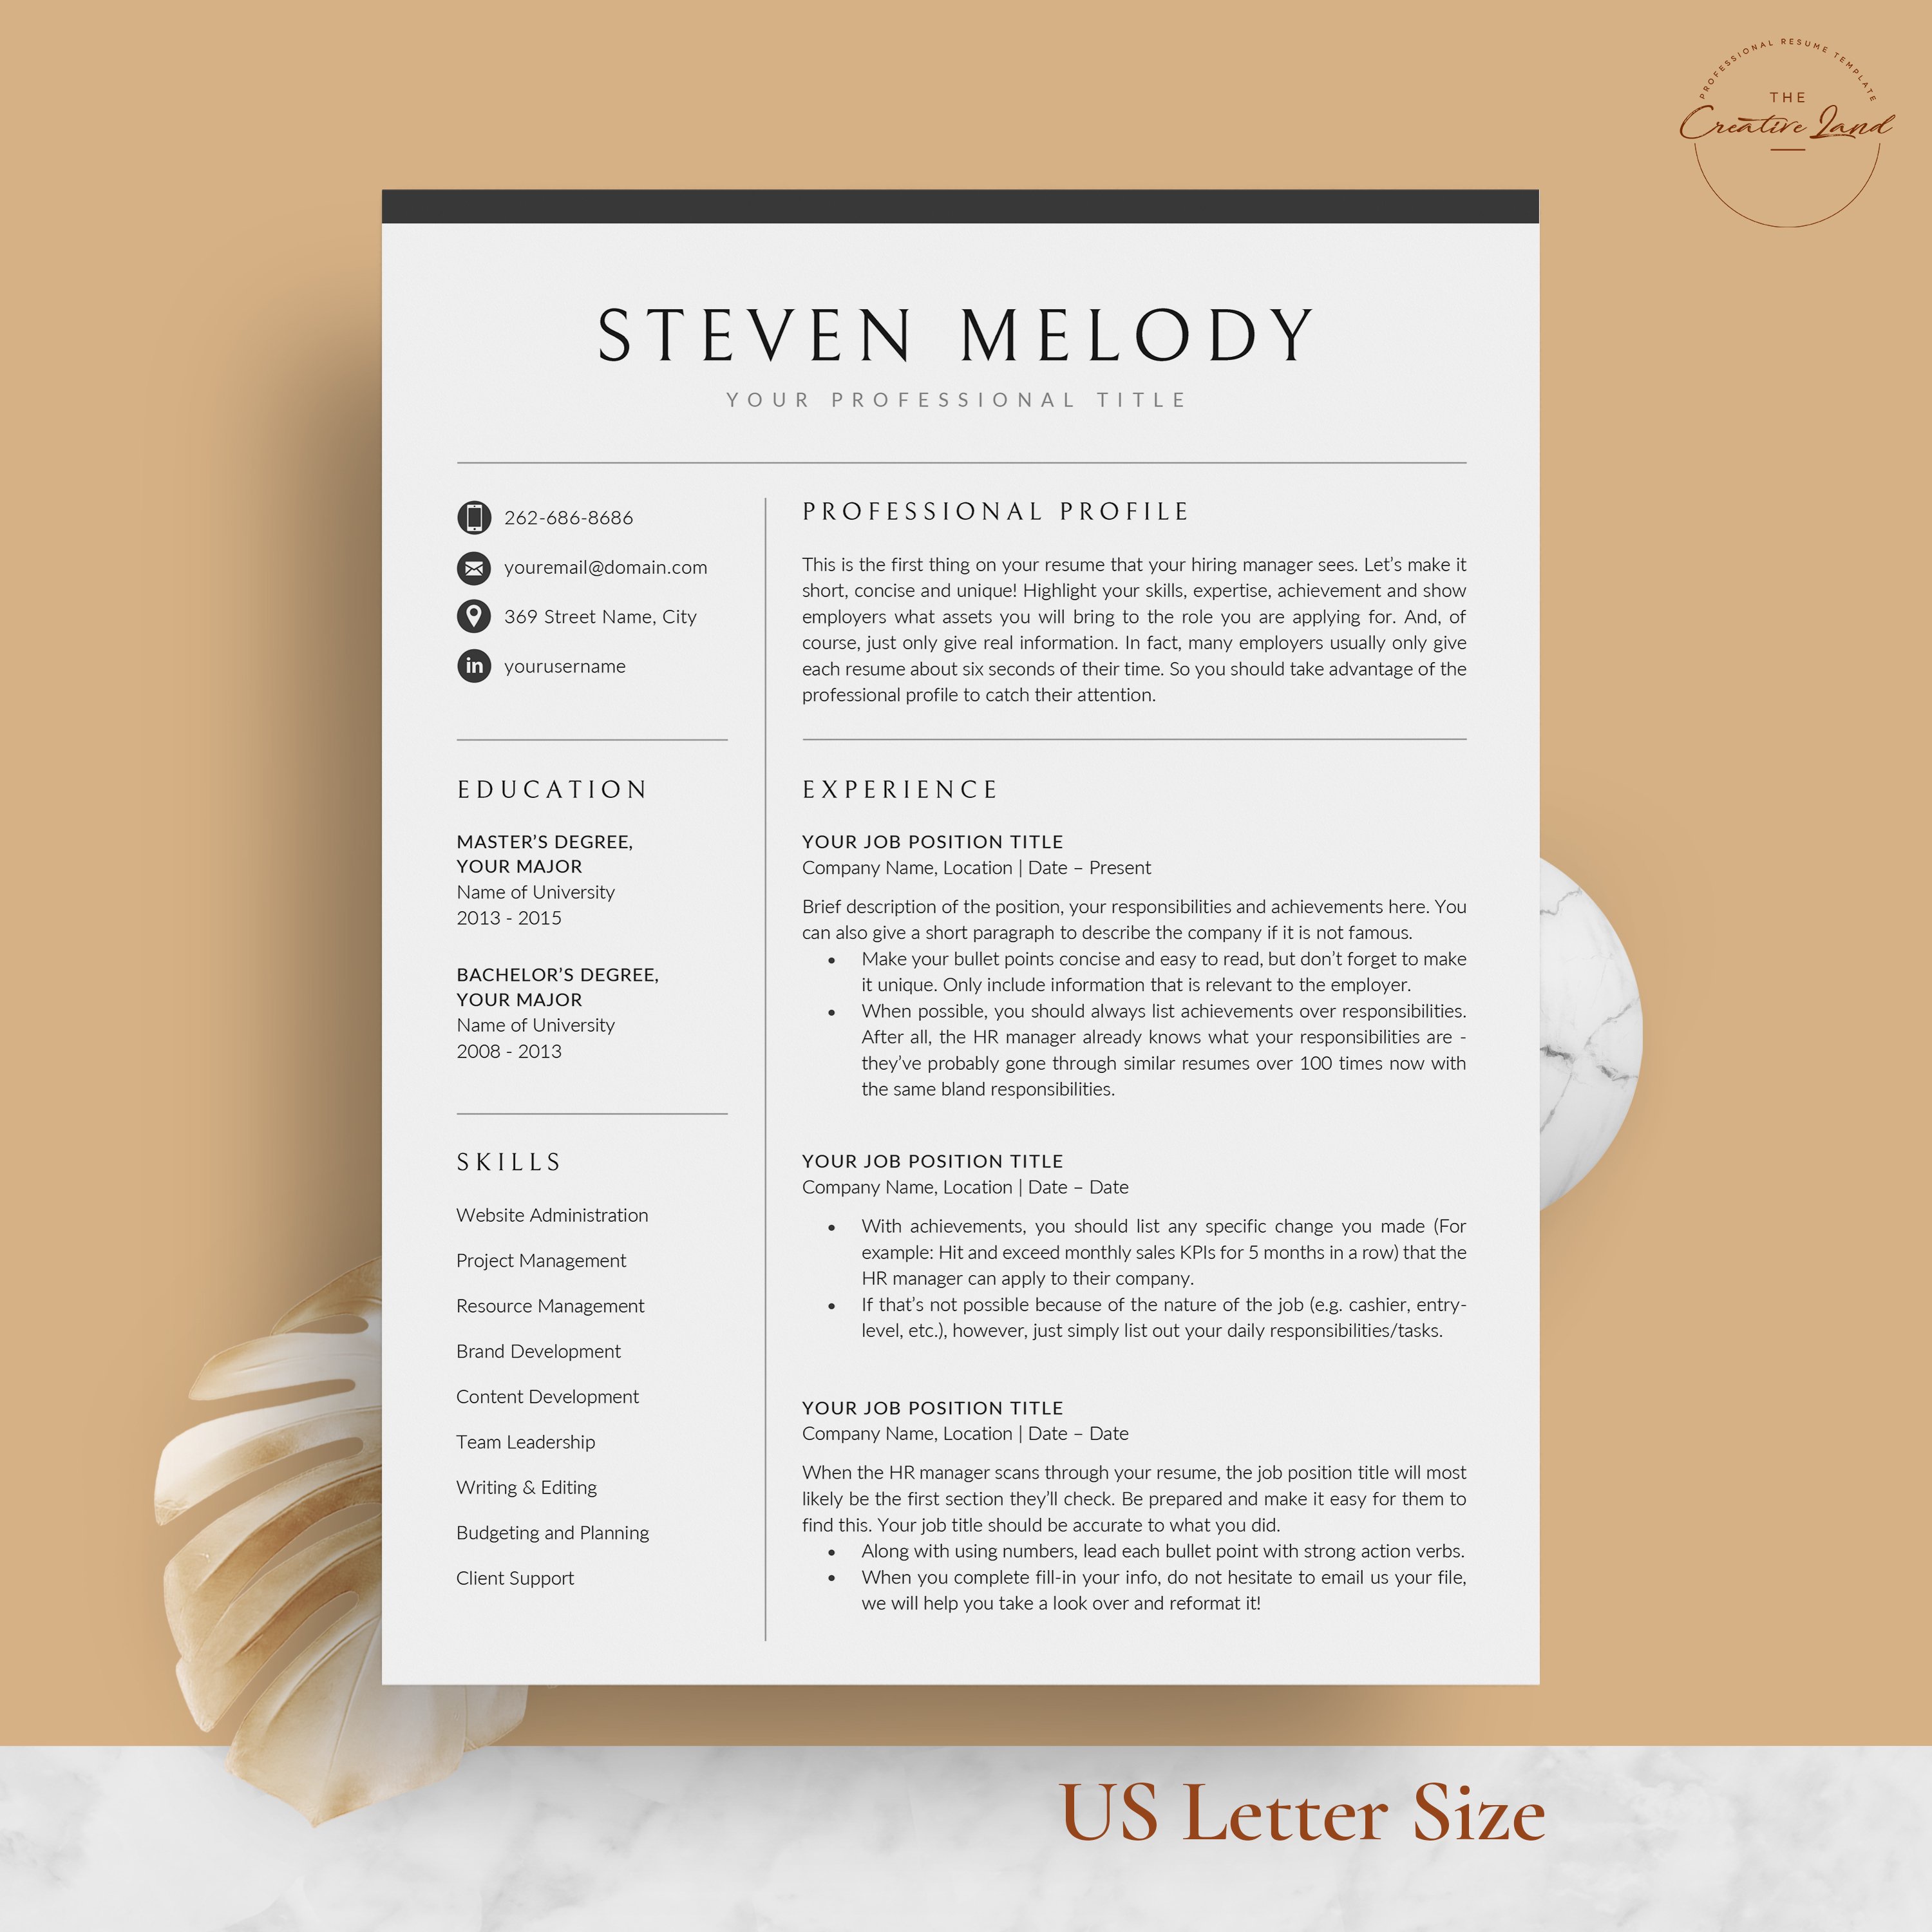 Resume/CV - The Melody preview image.